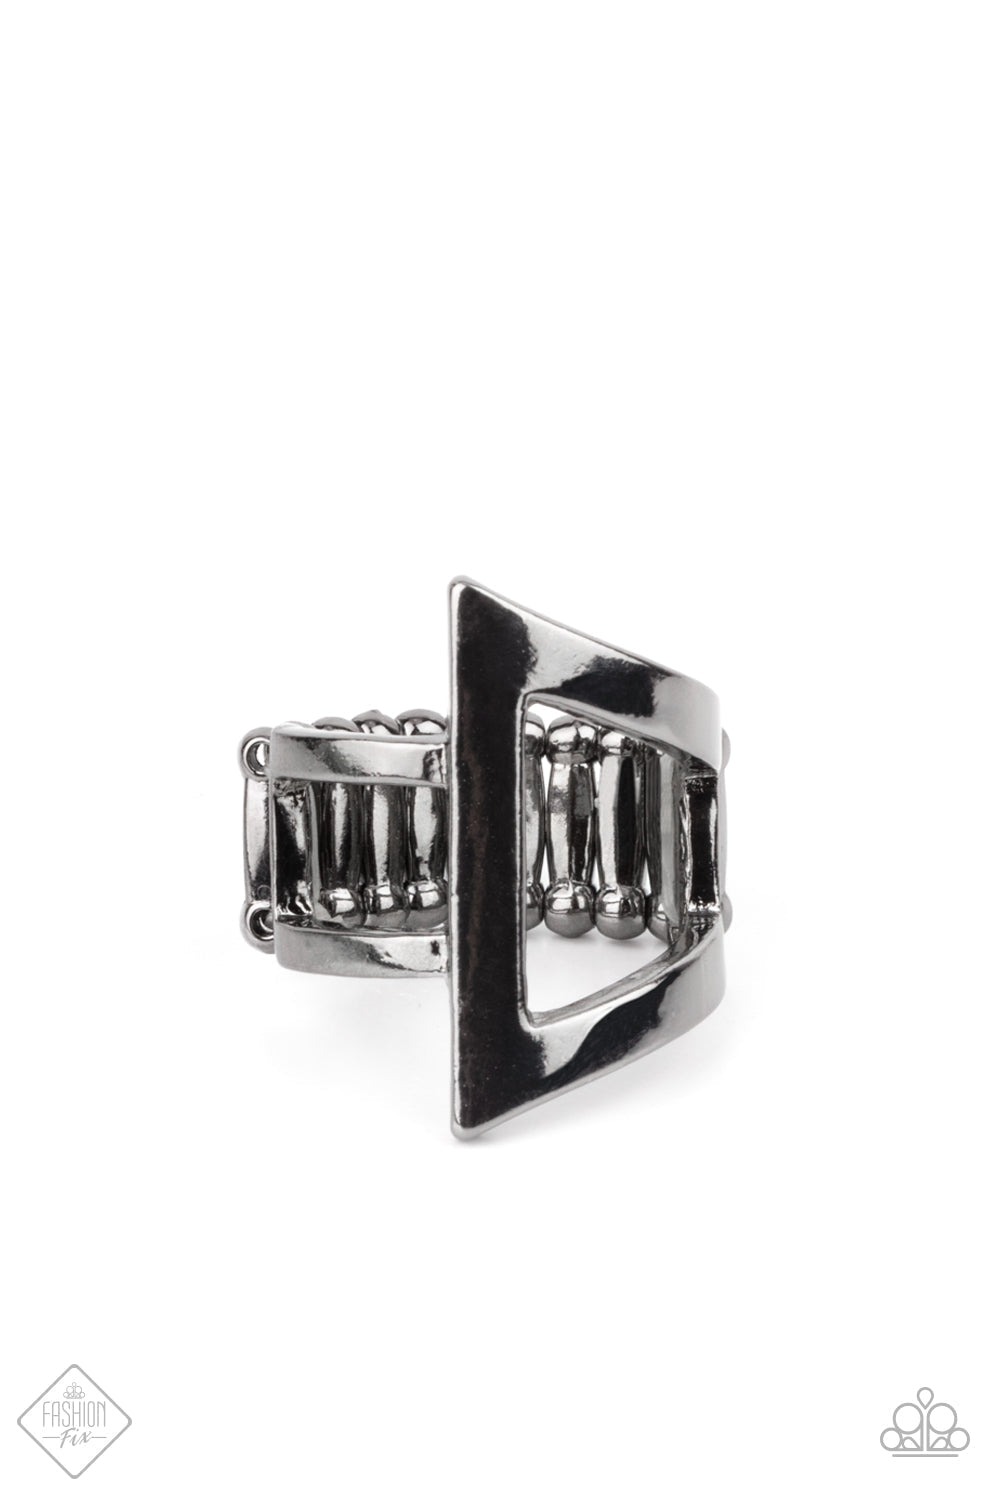 Vintage Skull Finger Ring Male Adult Metal Alloy Punk Stage Jewelry -  Walmart.com